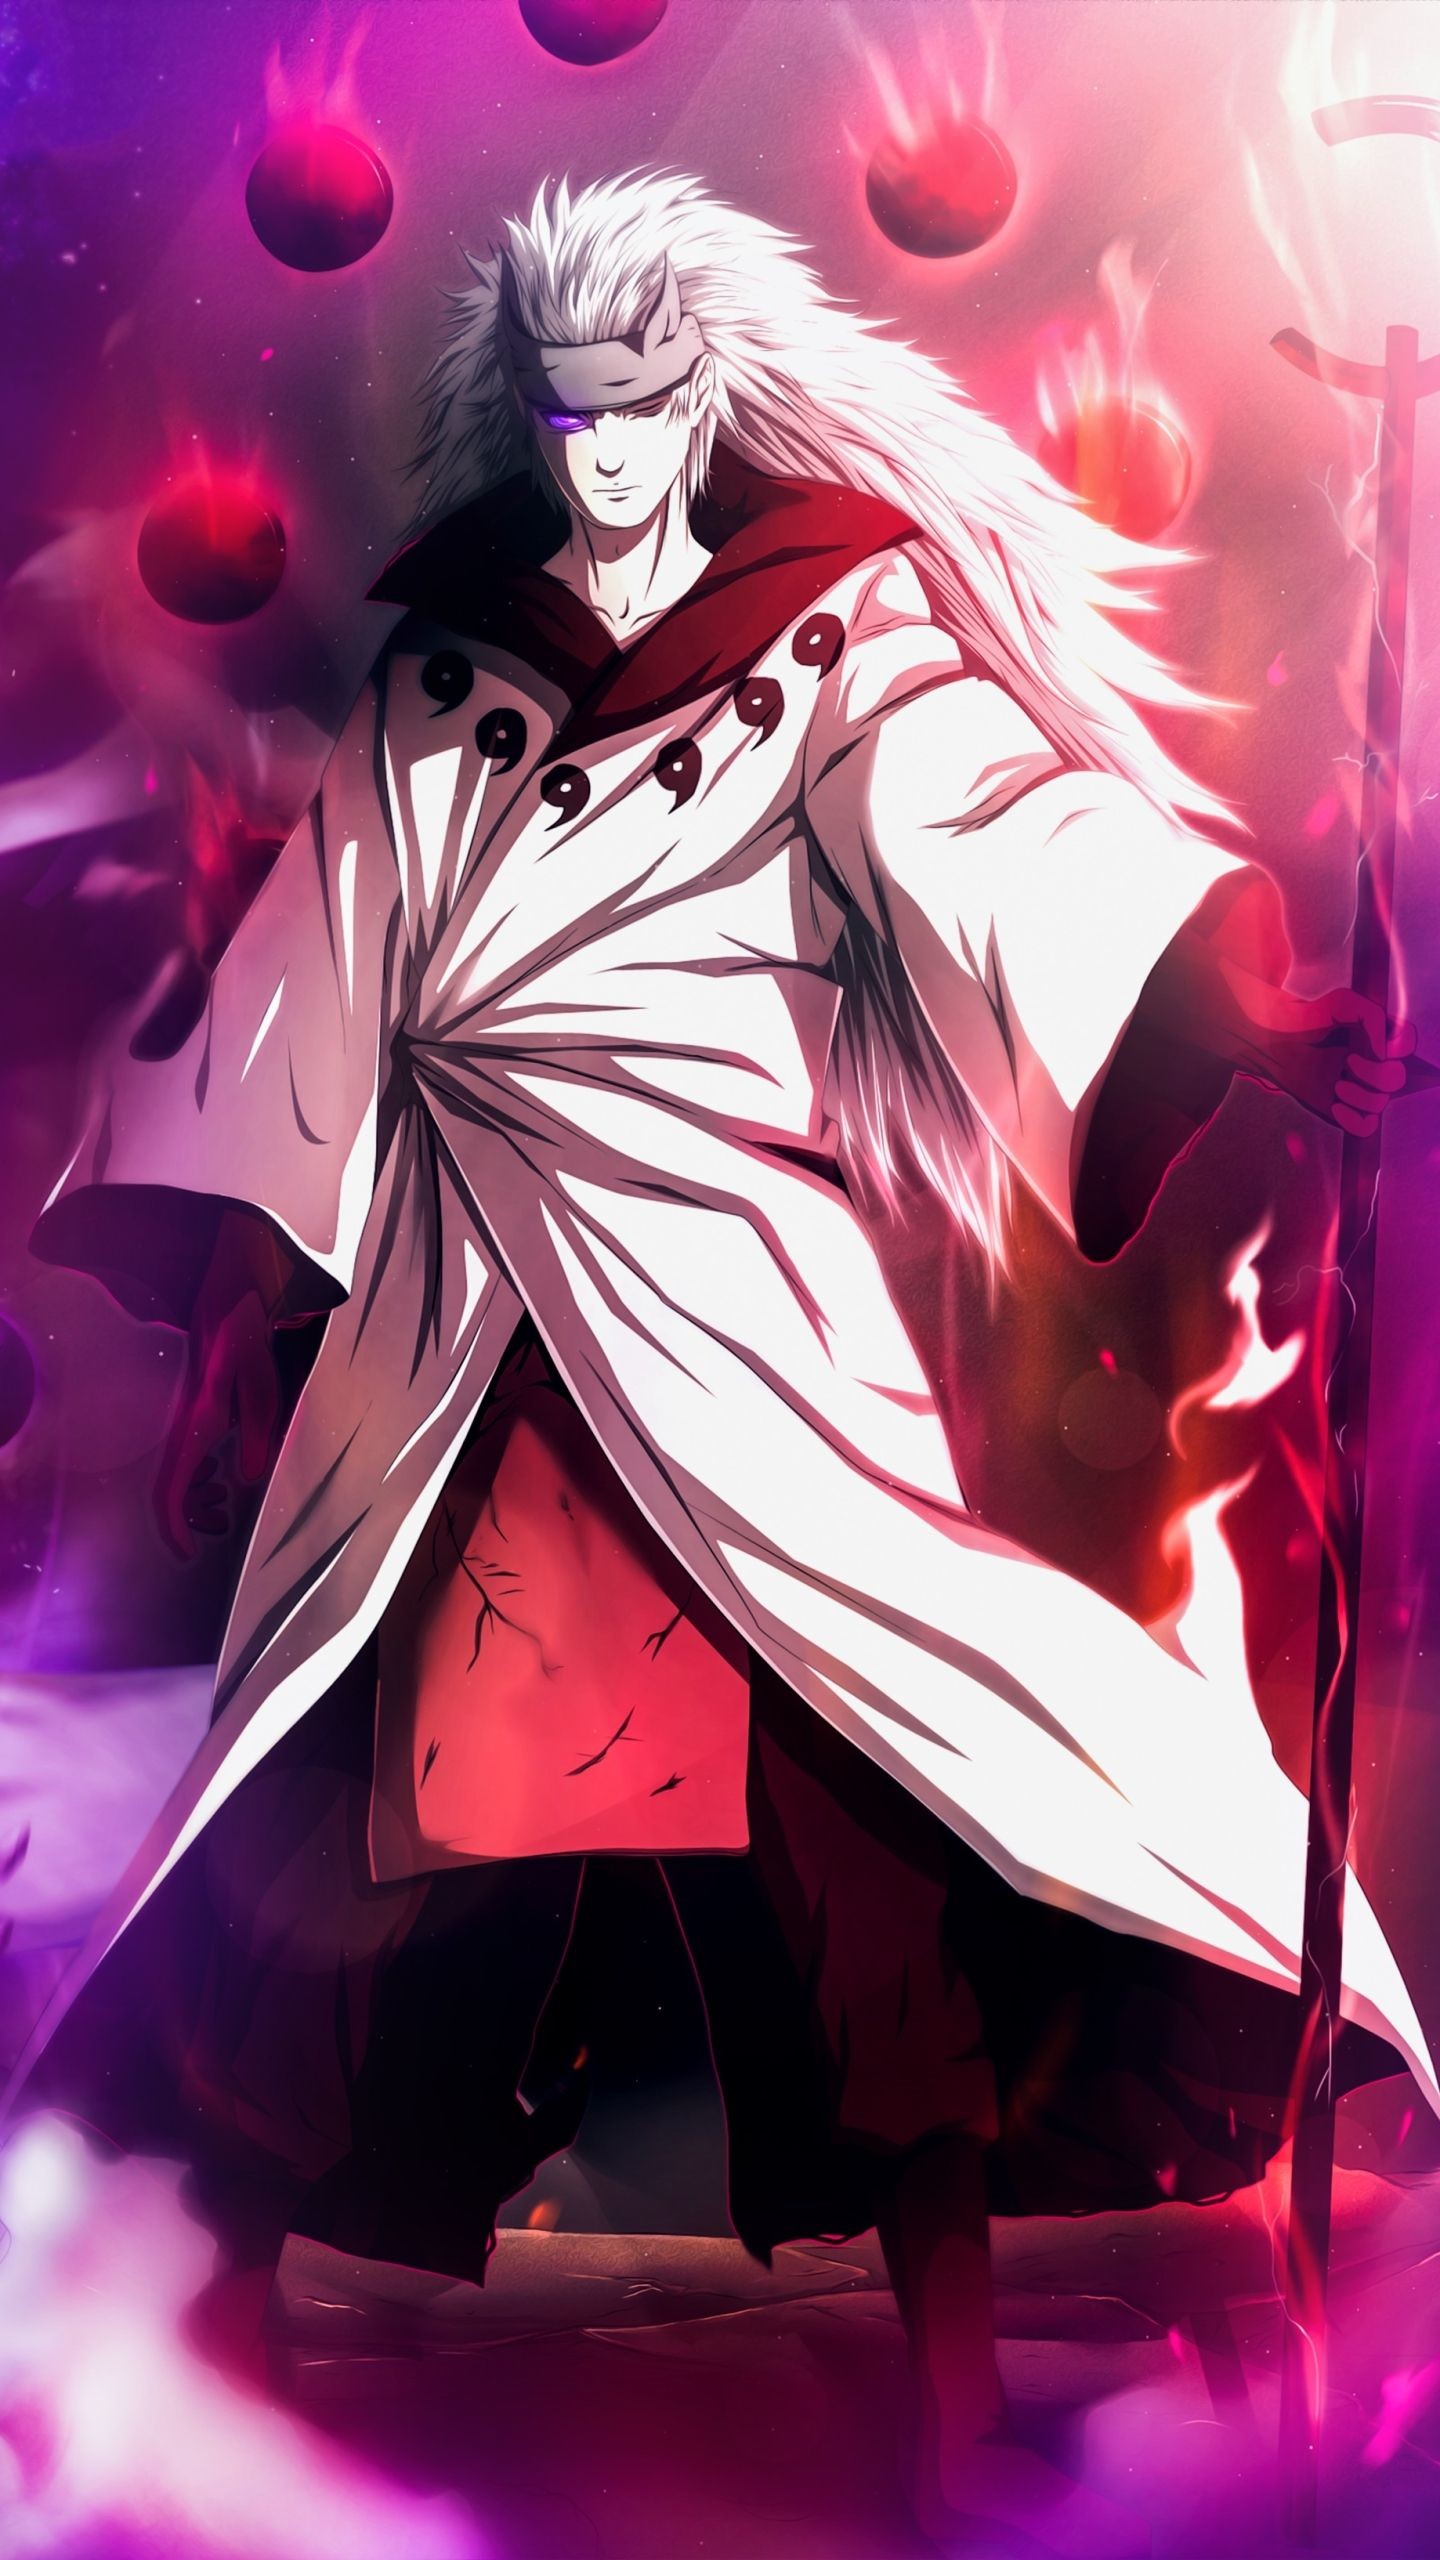 1440x2560 33 Madara Uchiha Apple/iPhone 5 (640x1136) Wallpapers - Mobile Abyss